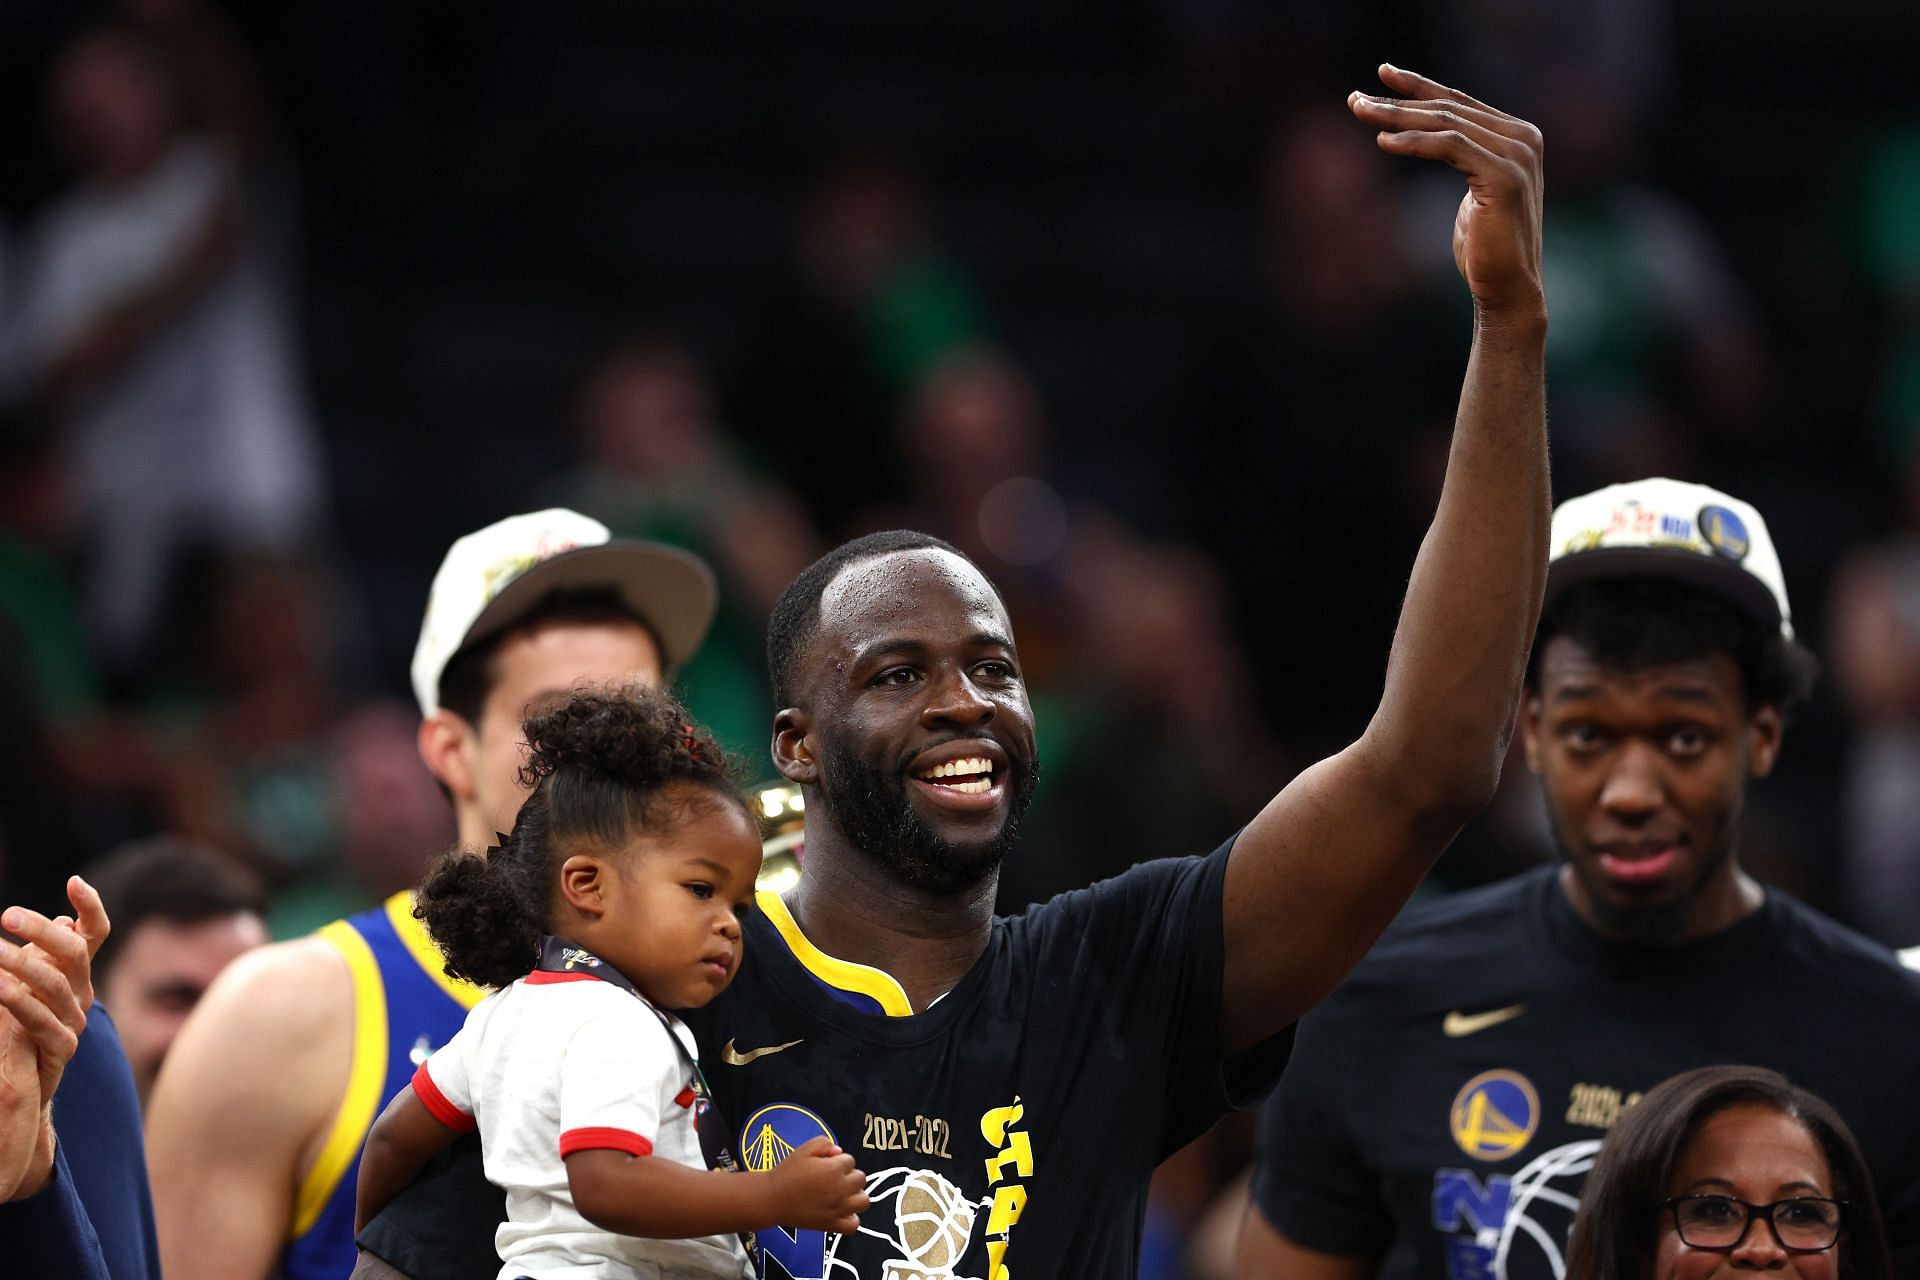 Draymond Green celebrates with his daughter, Kyla Green, after winning the 2022 NBA Finals.